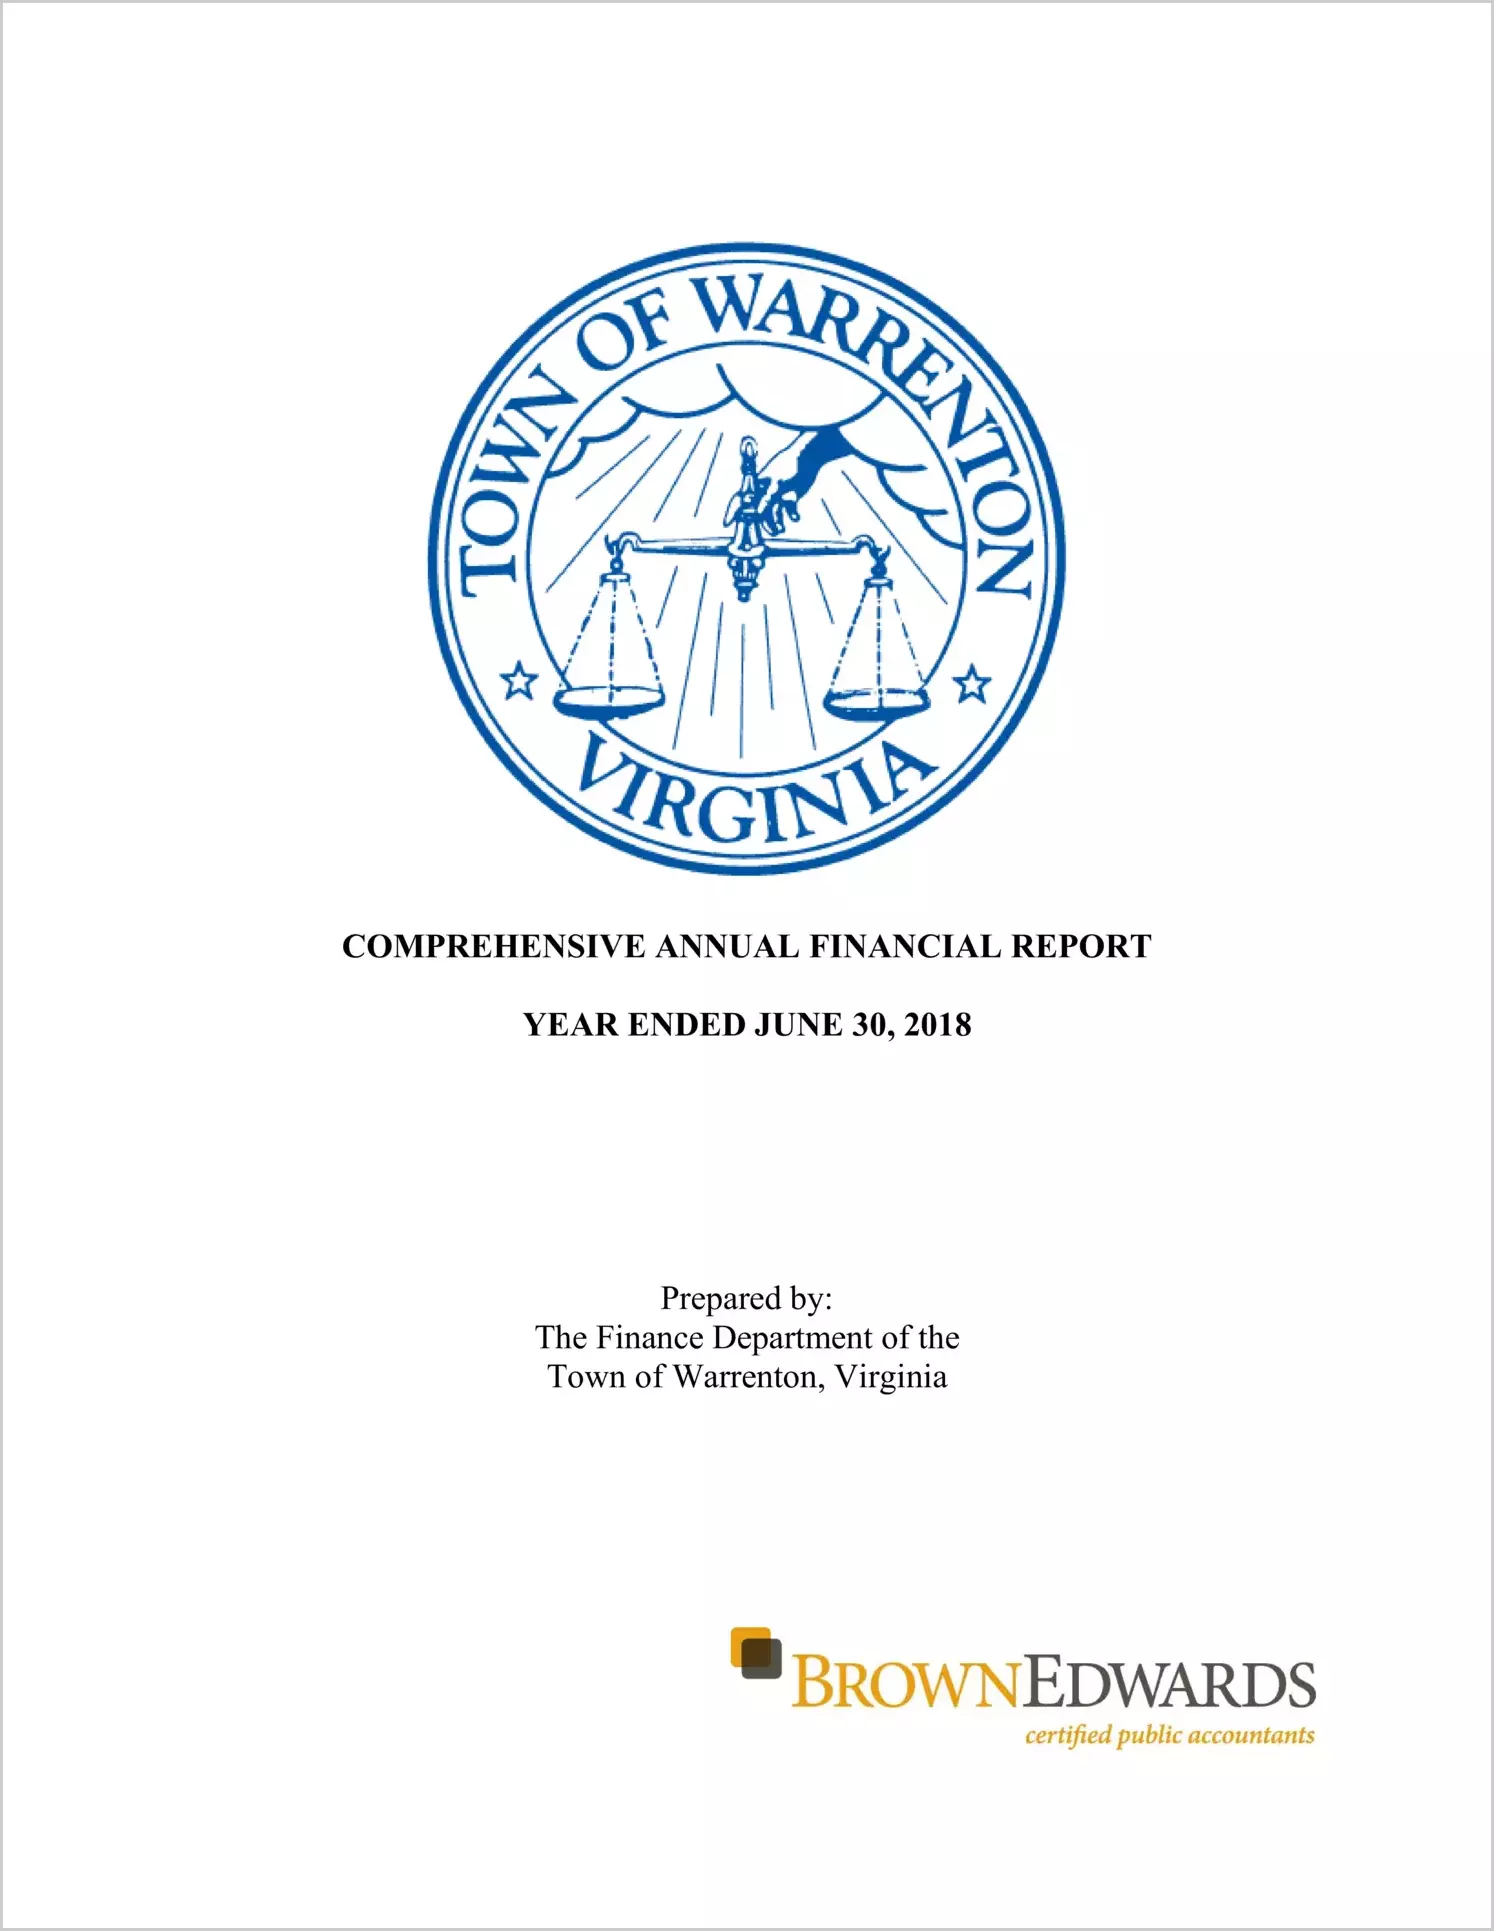 2018 Annual Financial Report for Town of Warrenton